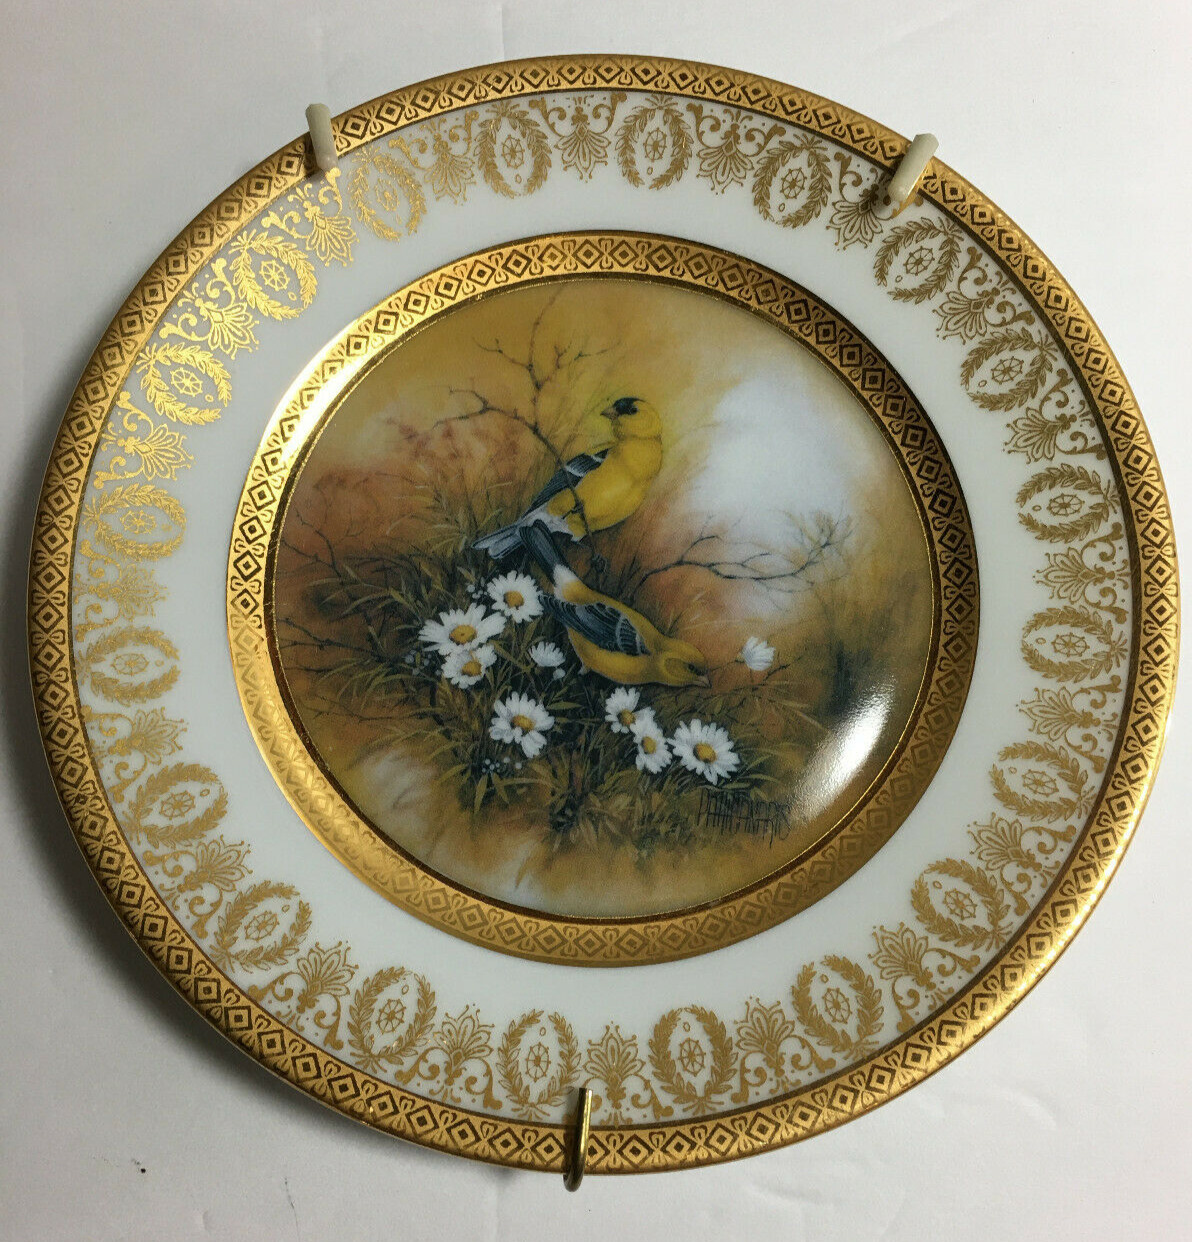 GOLD FINCHES Limoges France Plate & Hanger by Patti Canaris Songbirds ca. 1982